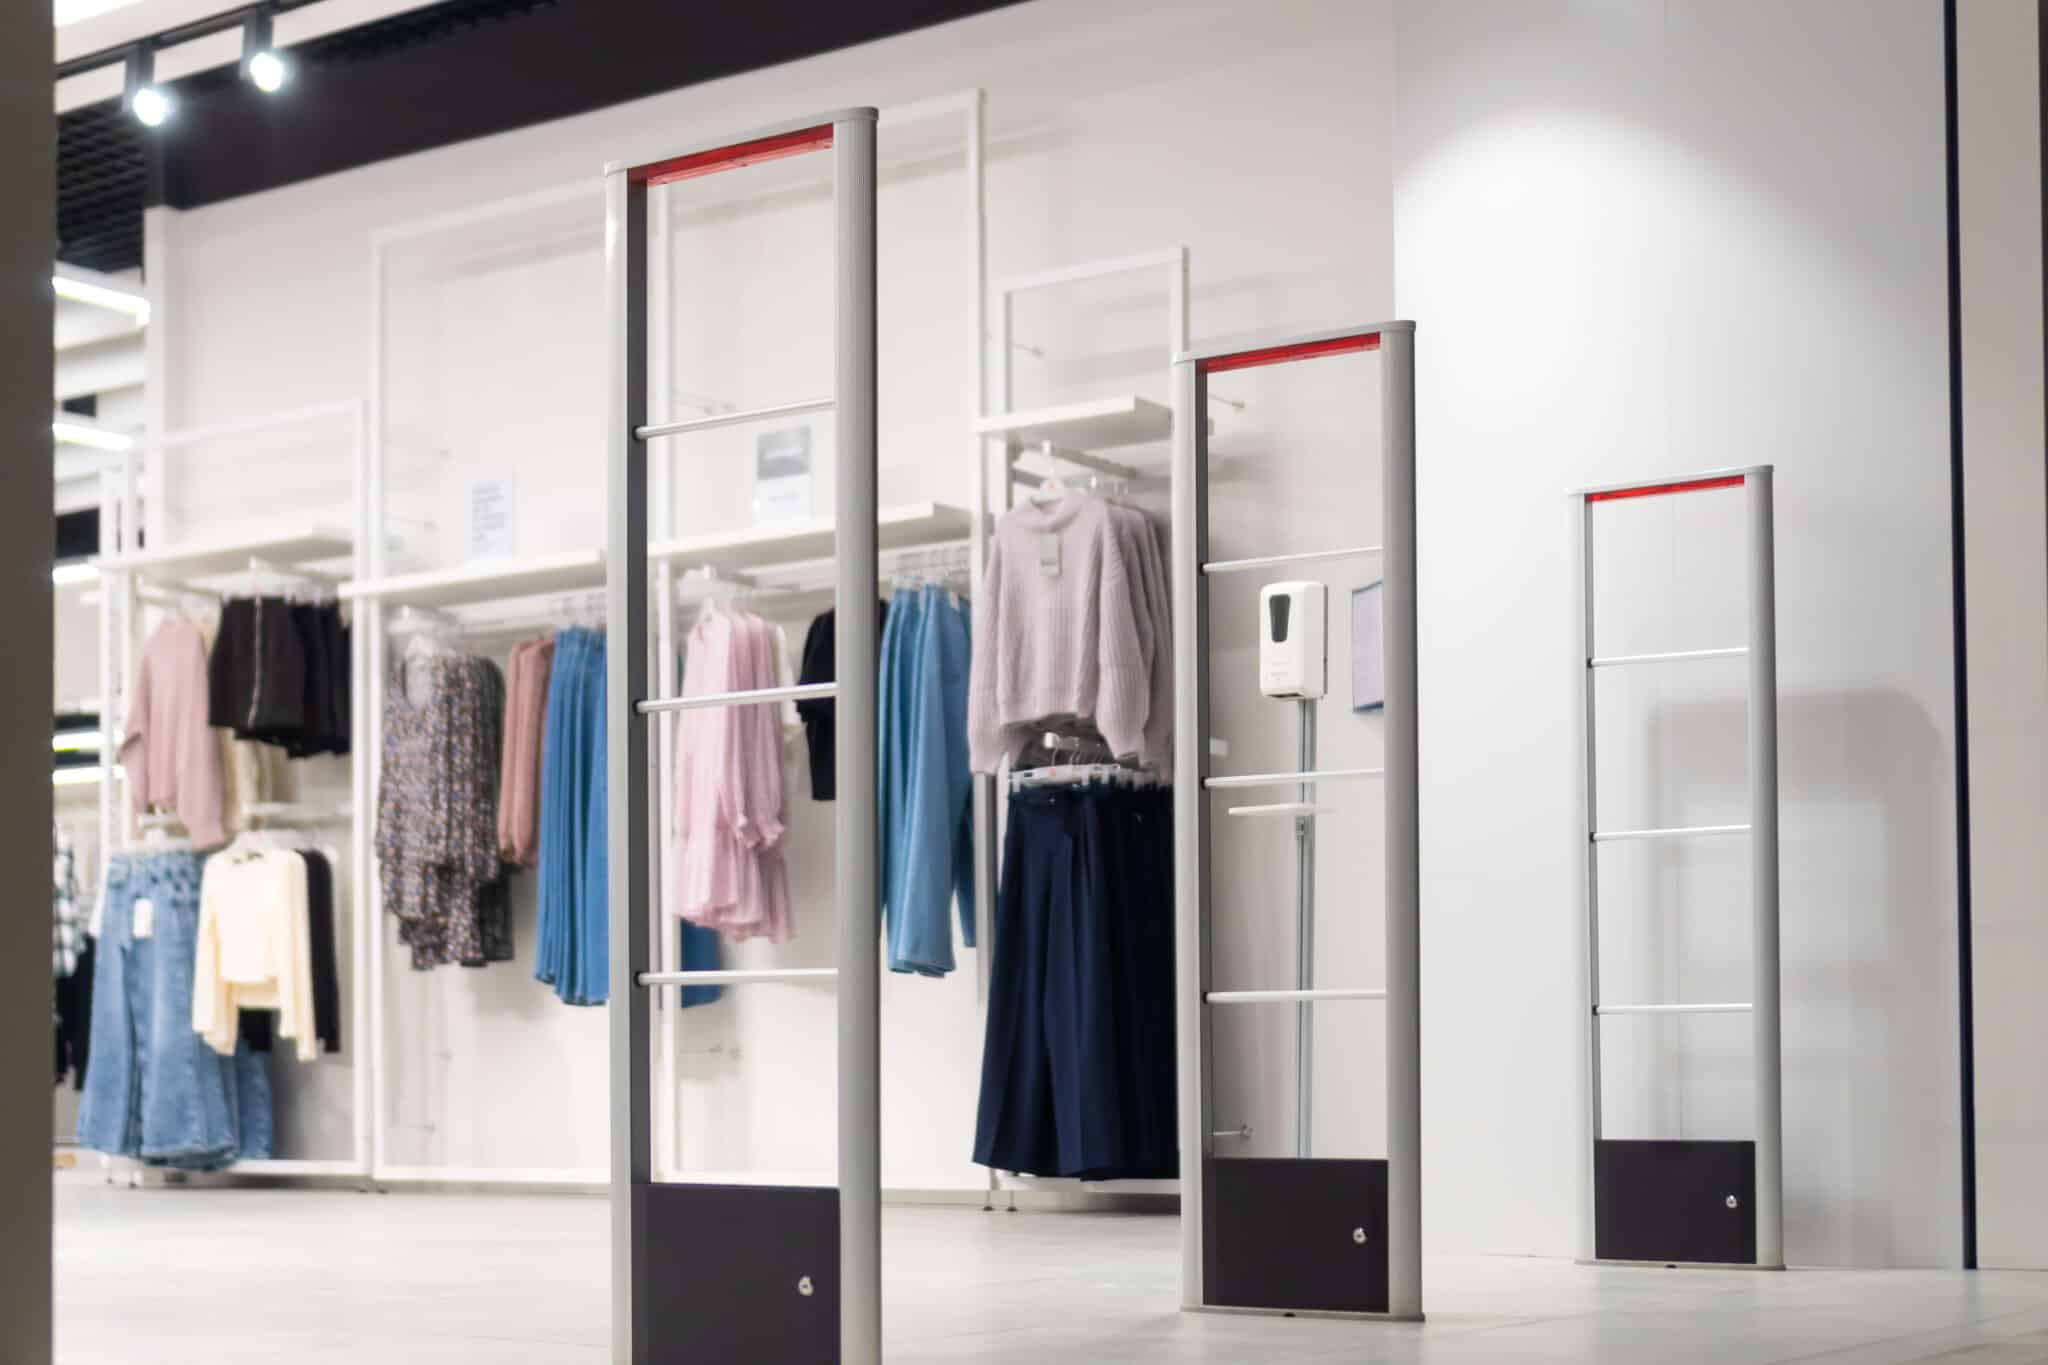 A retail apparel store with security sensors